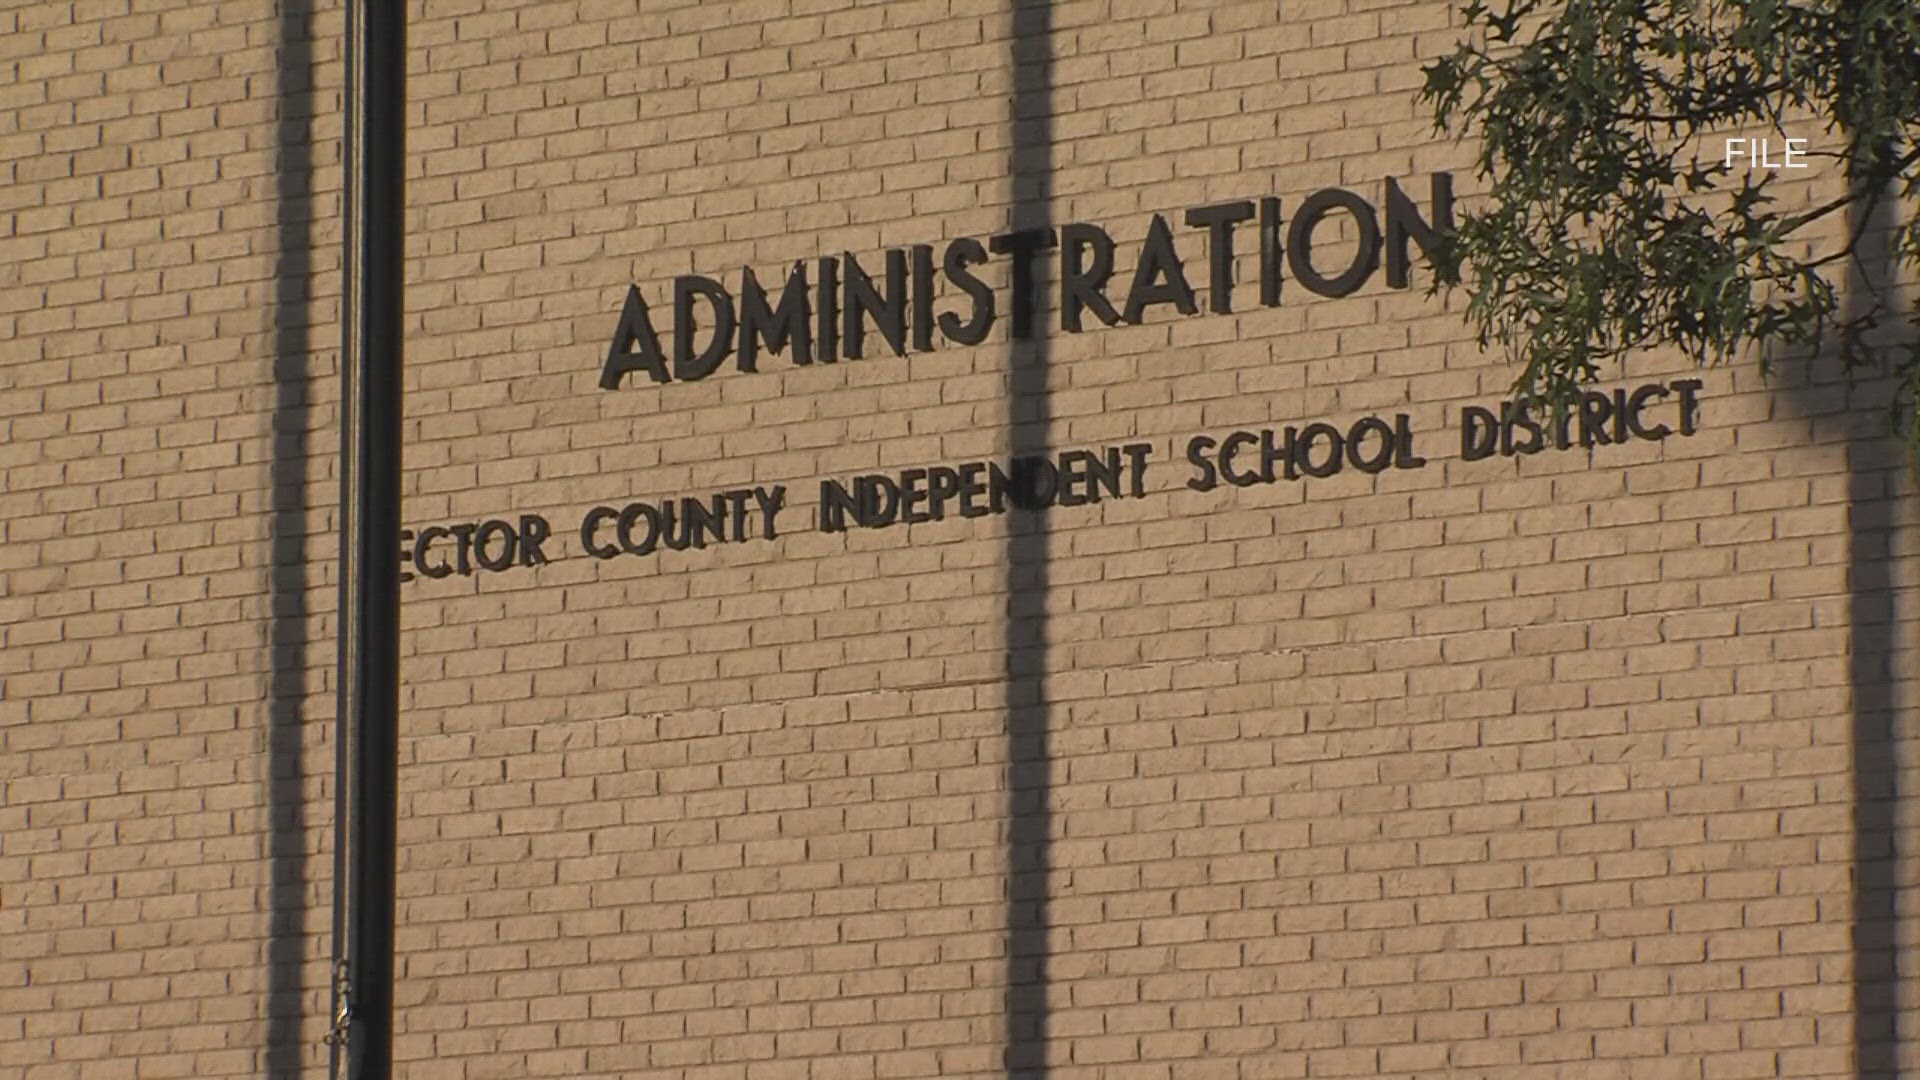 Funds that were donated to ECISD to provide for free internet access have run out.